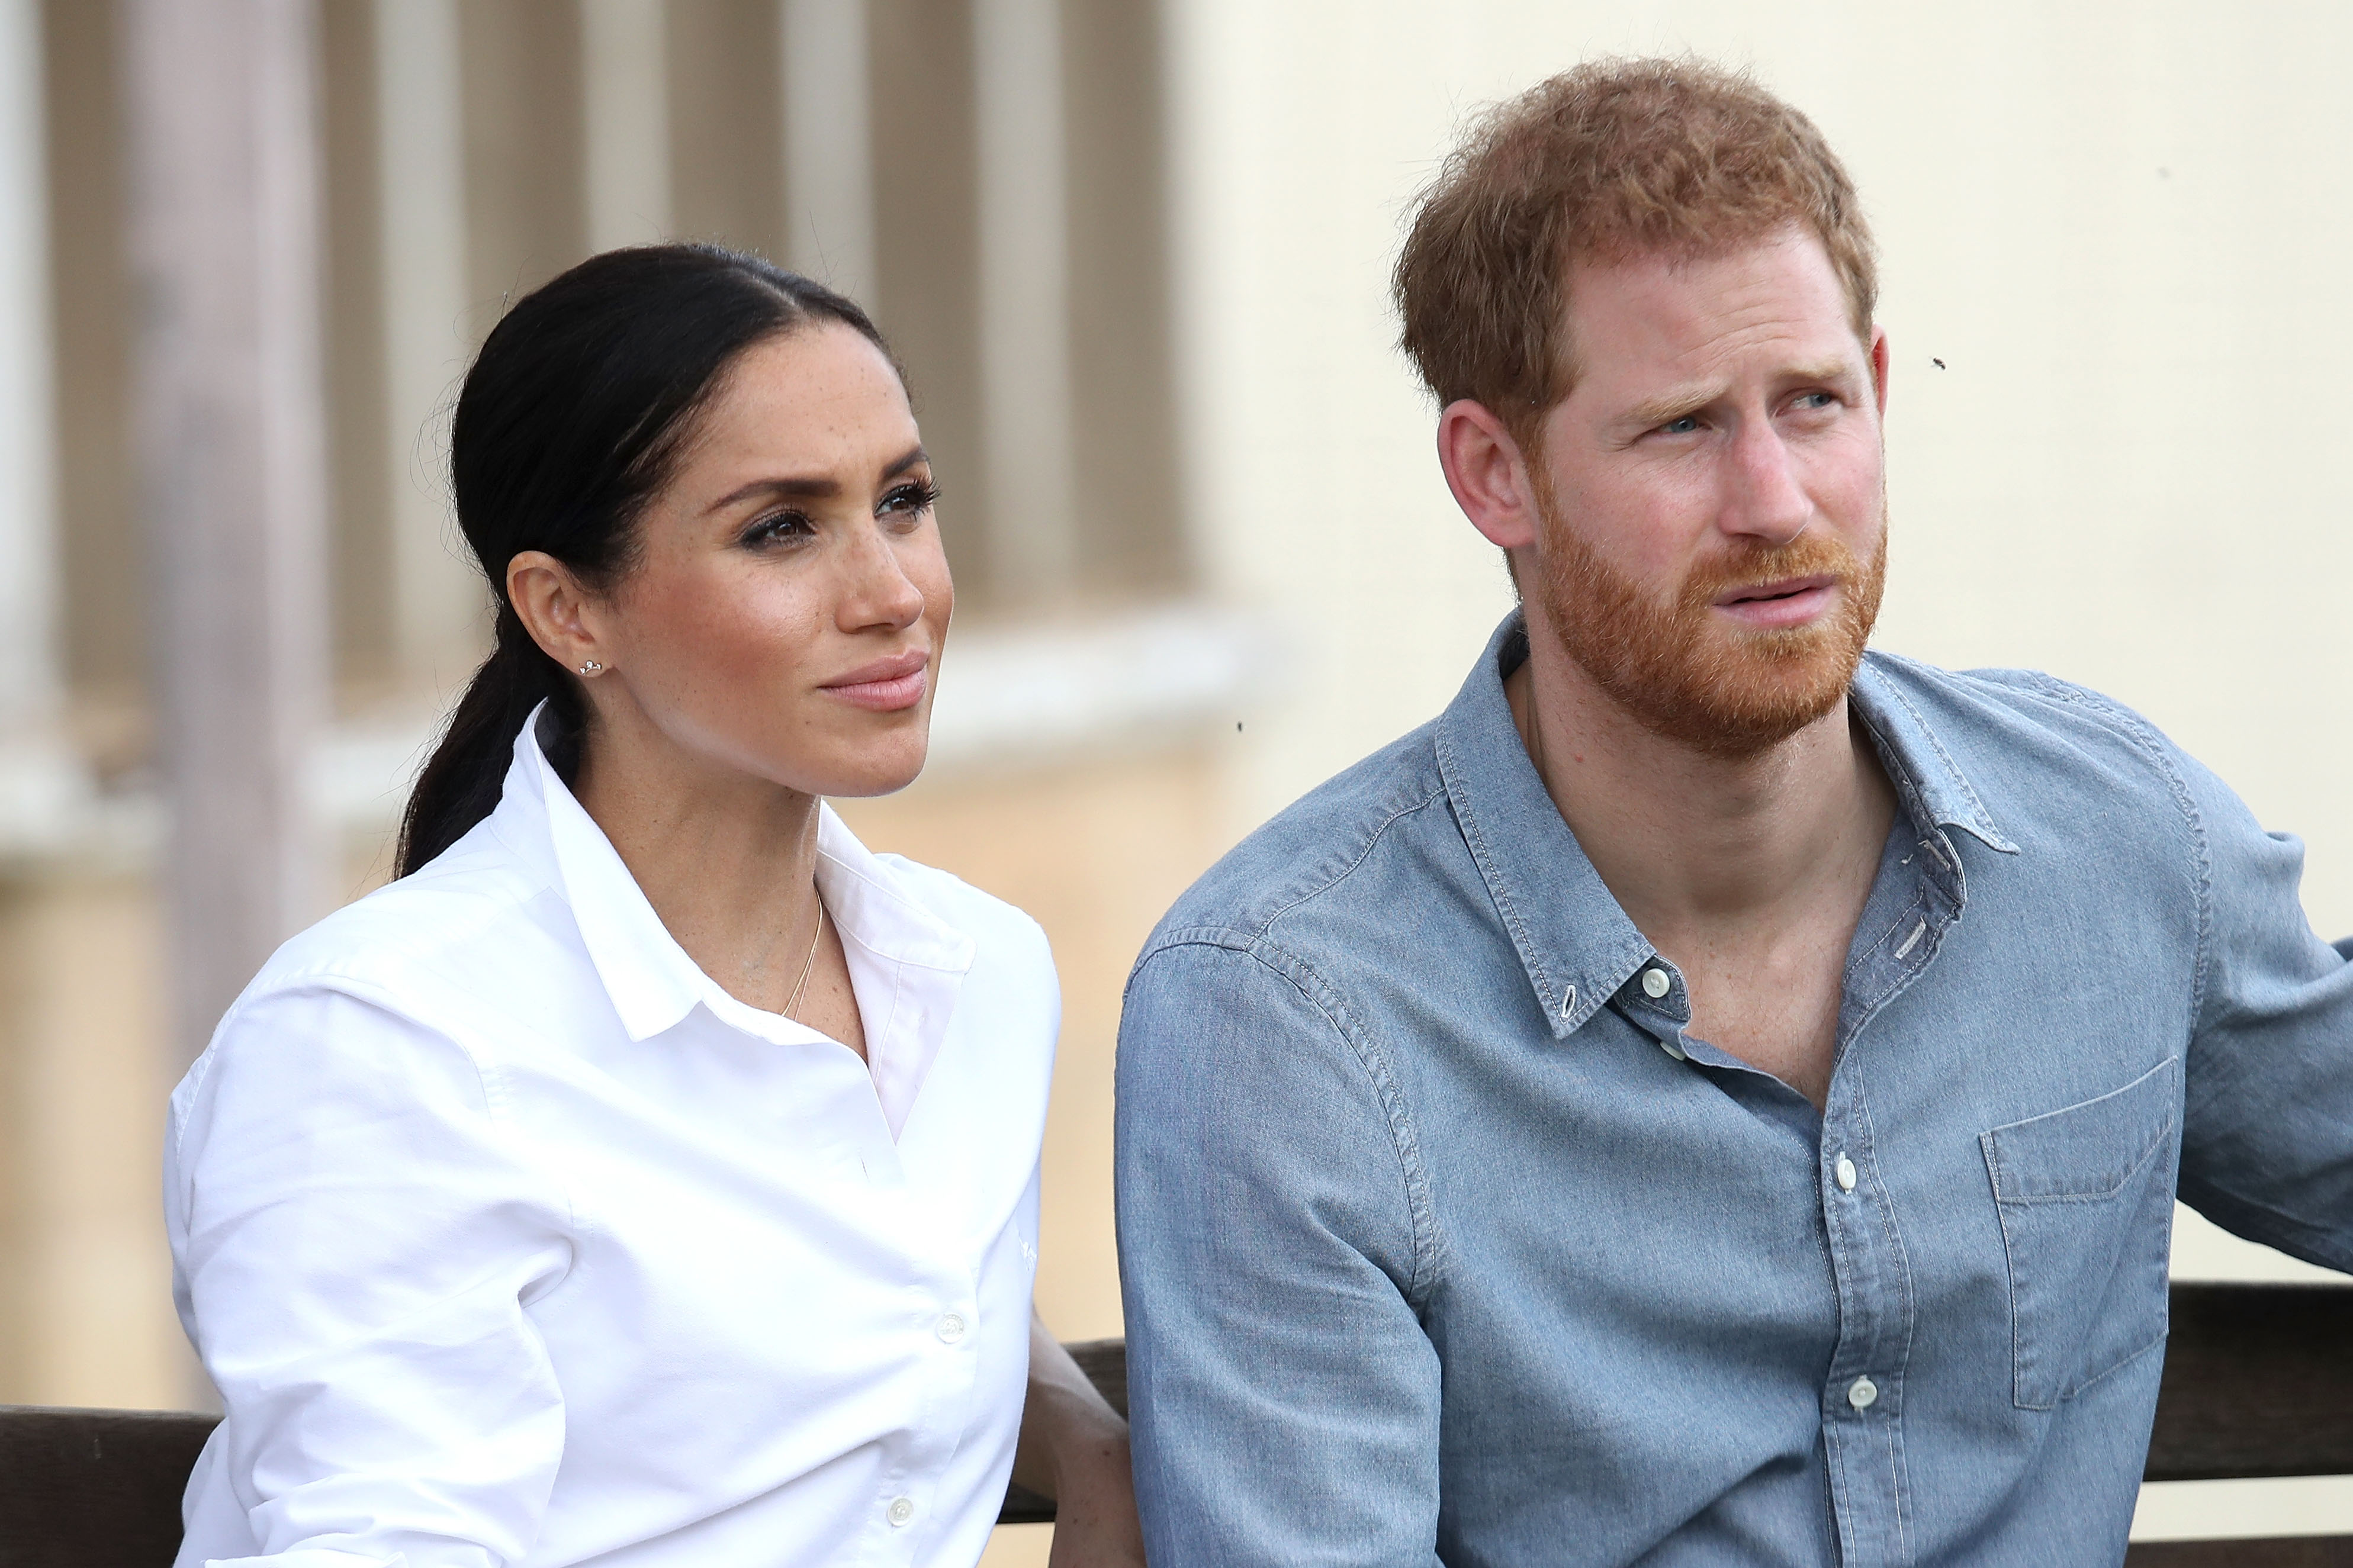 Meghan Markle and Prince Harry sit side-by-side.